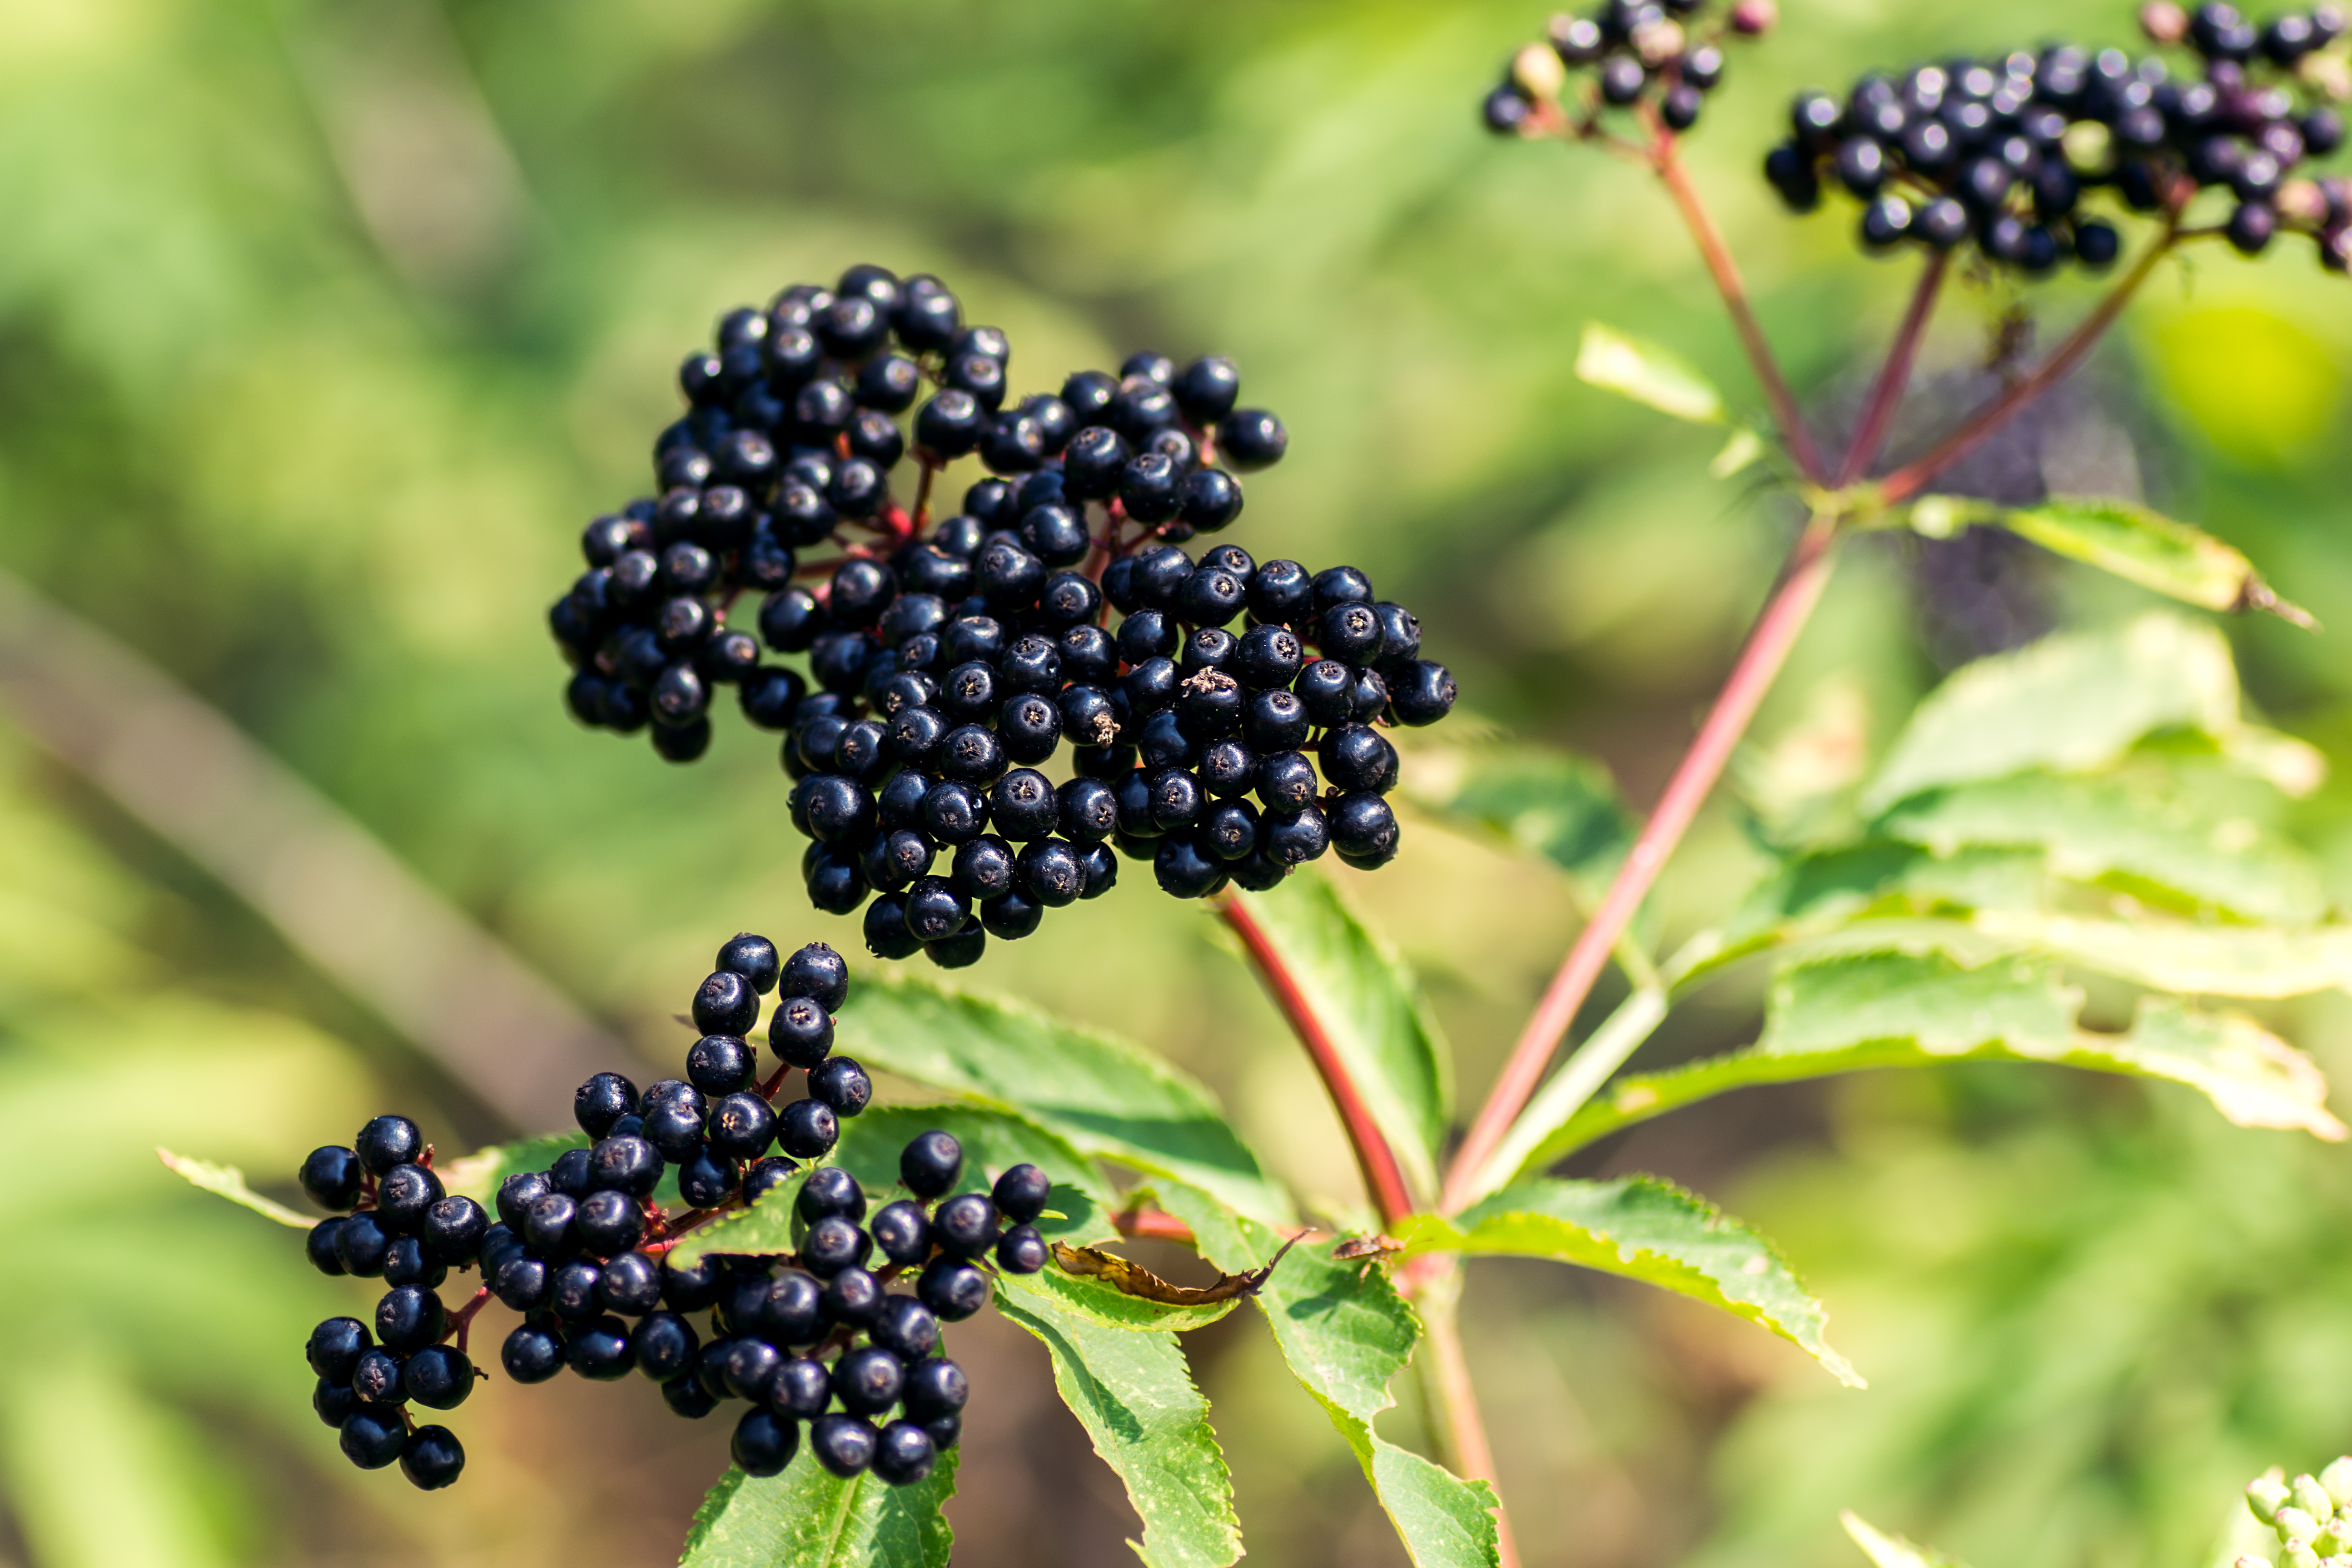 What Is Elderberry Good For?